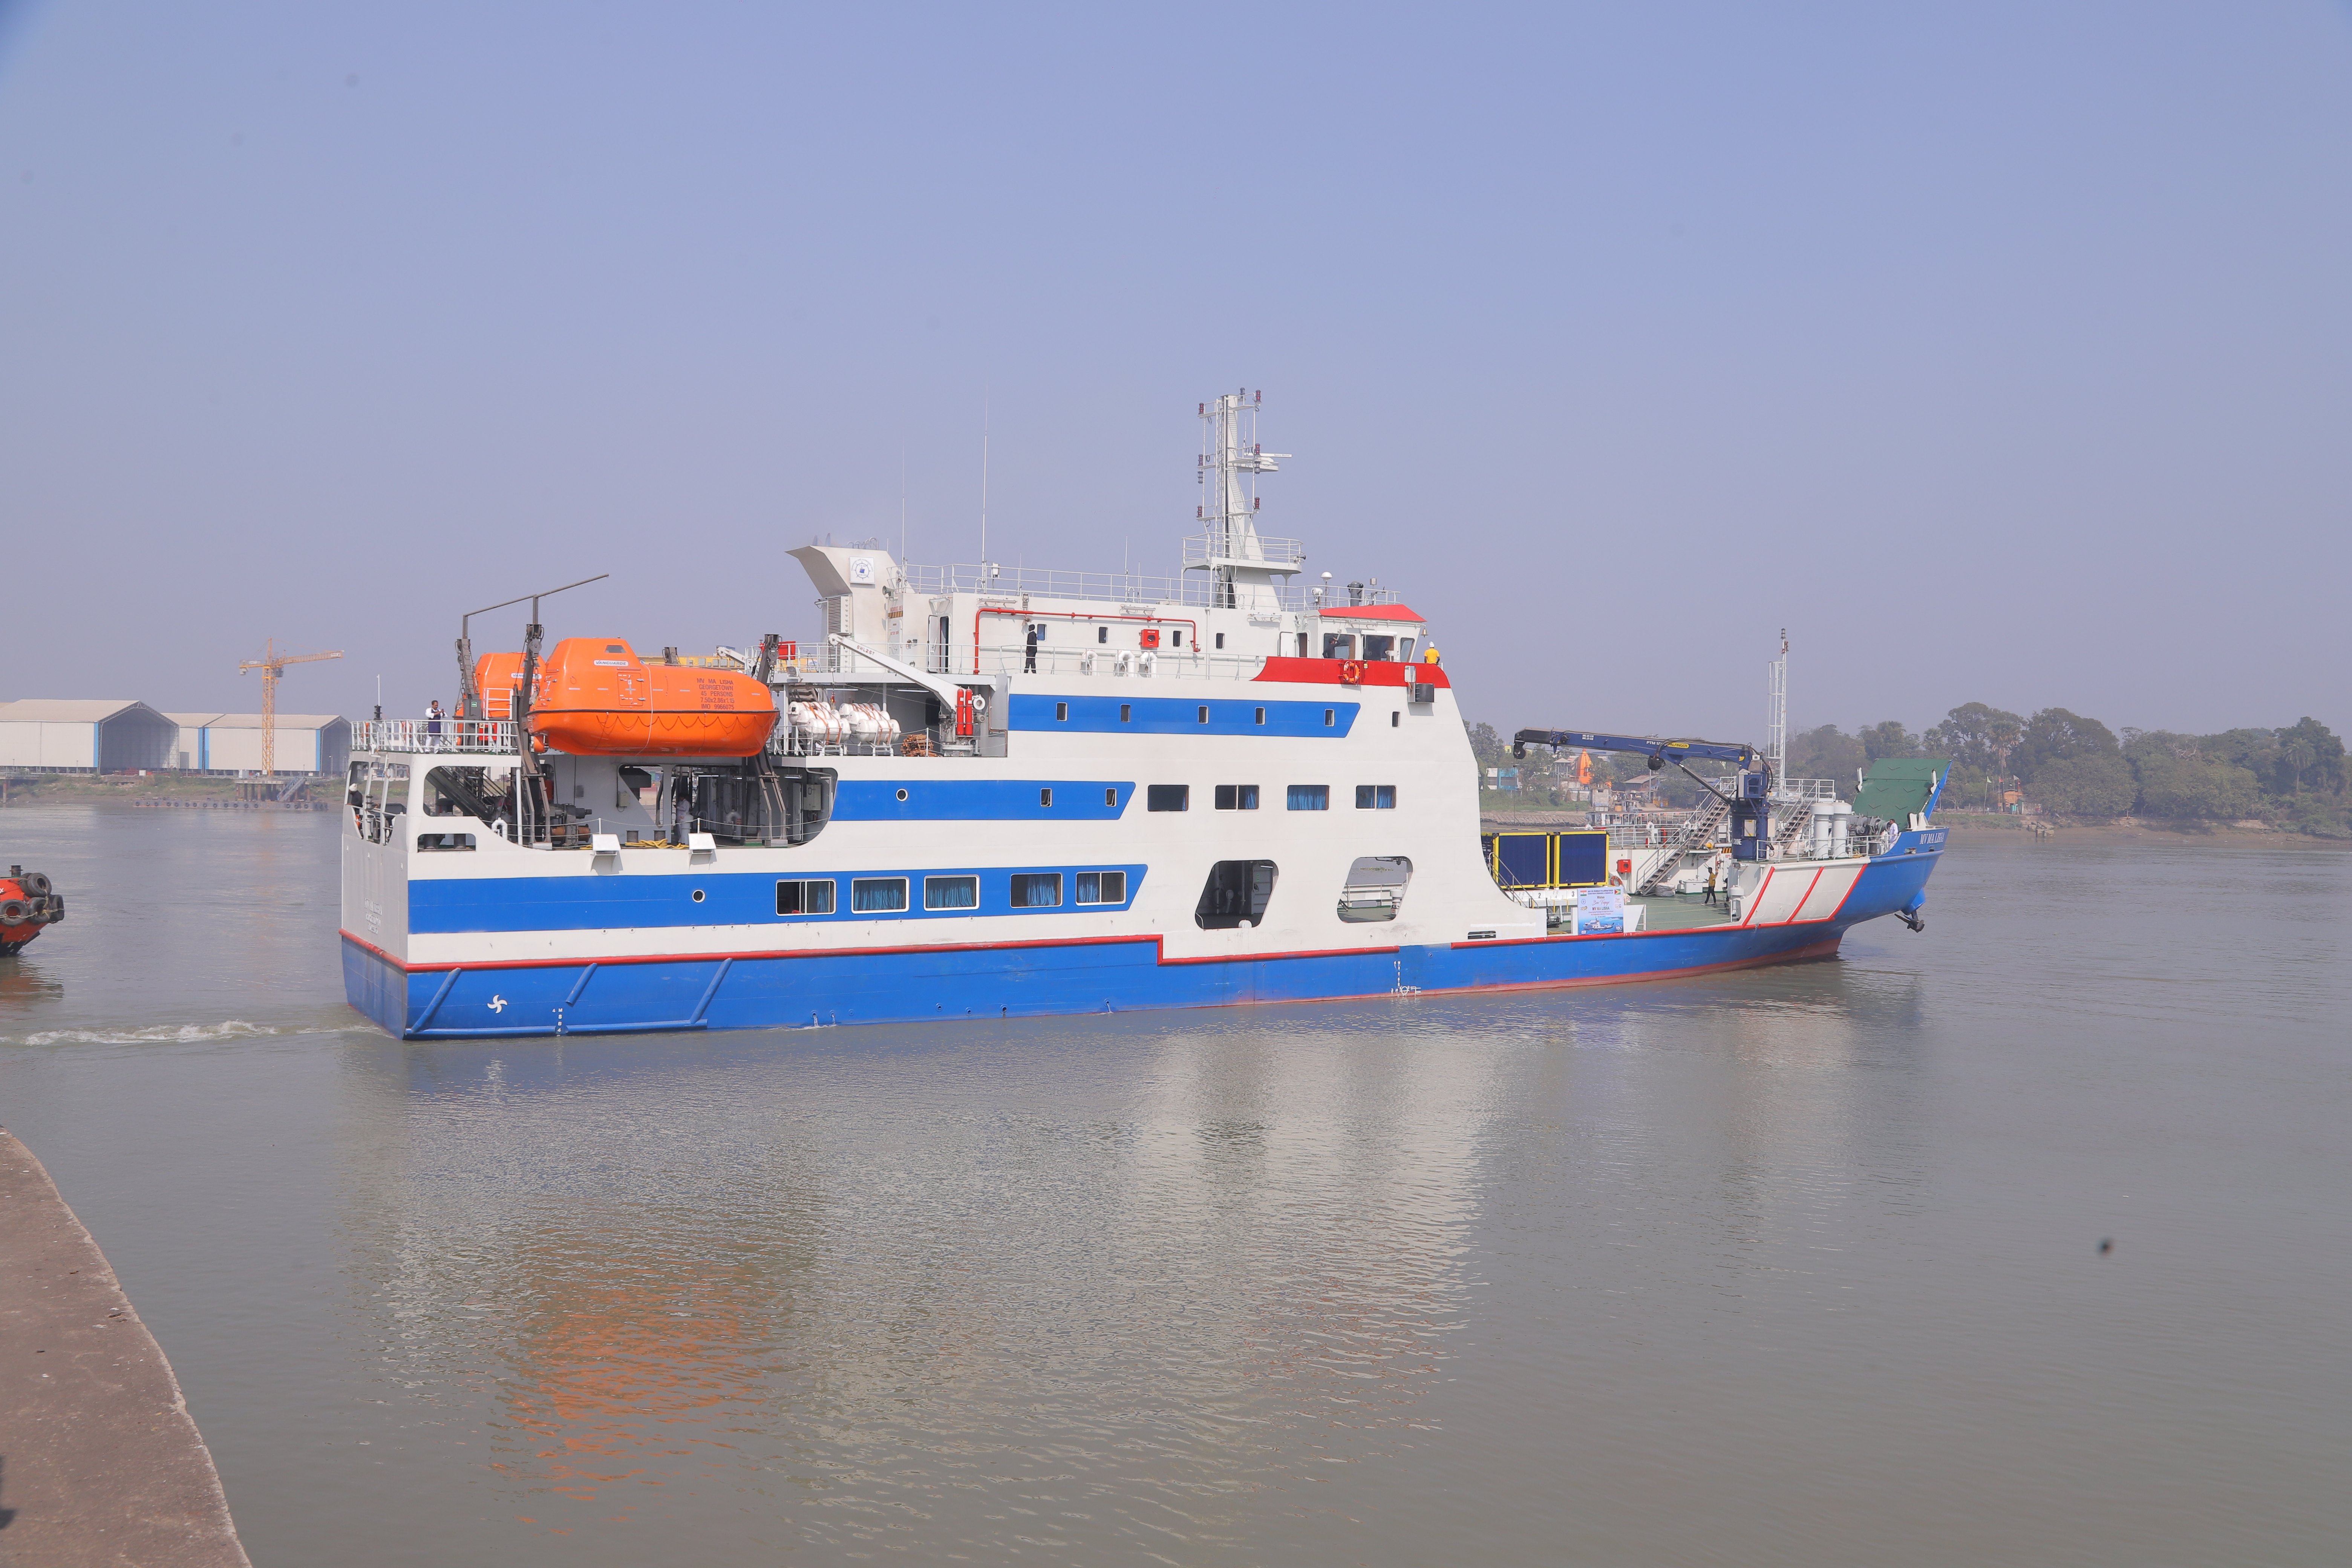 BON VOYAGE MV MA Lisha- Flagging Off of GRSE’s In-House Designed Ocean Going Passenger & Cargo Ferry Vessel to The Cooperative Republic of Guyana on 12 Jan 23